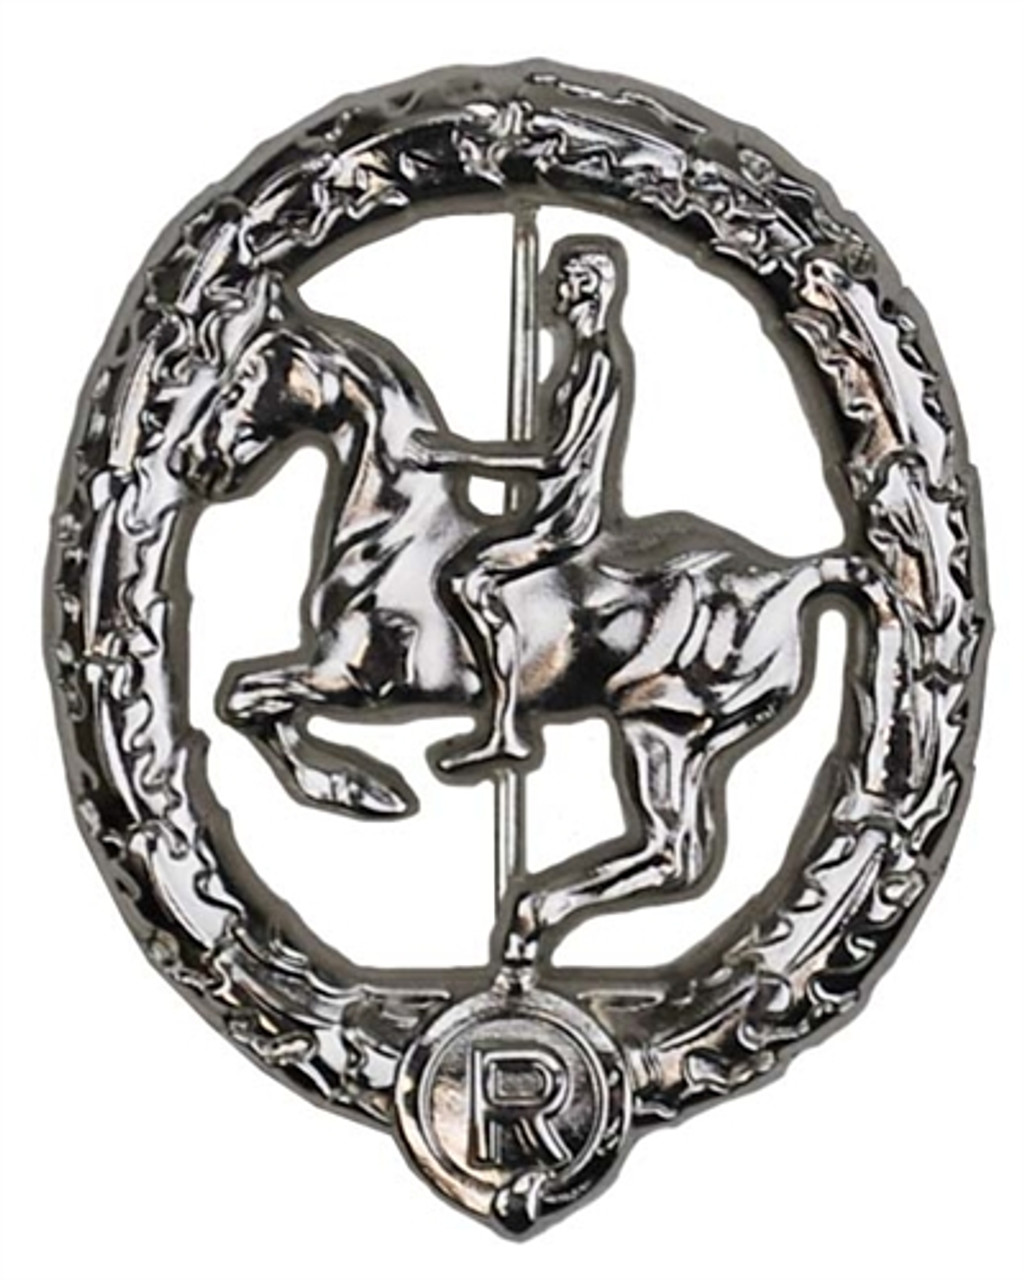 German Riders Qualification Badge - Silver  from Hessen Antique